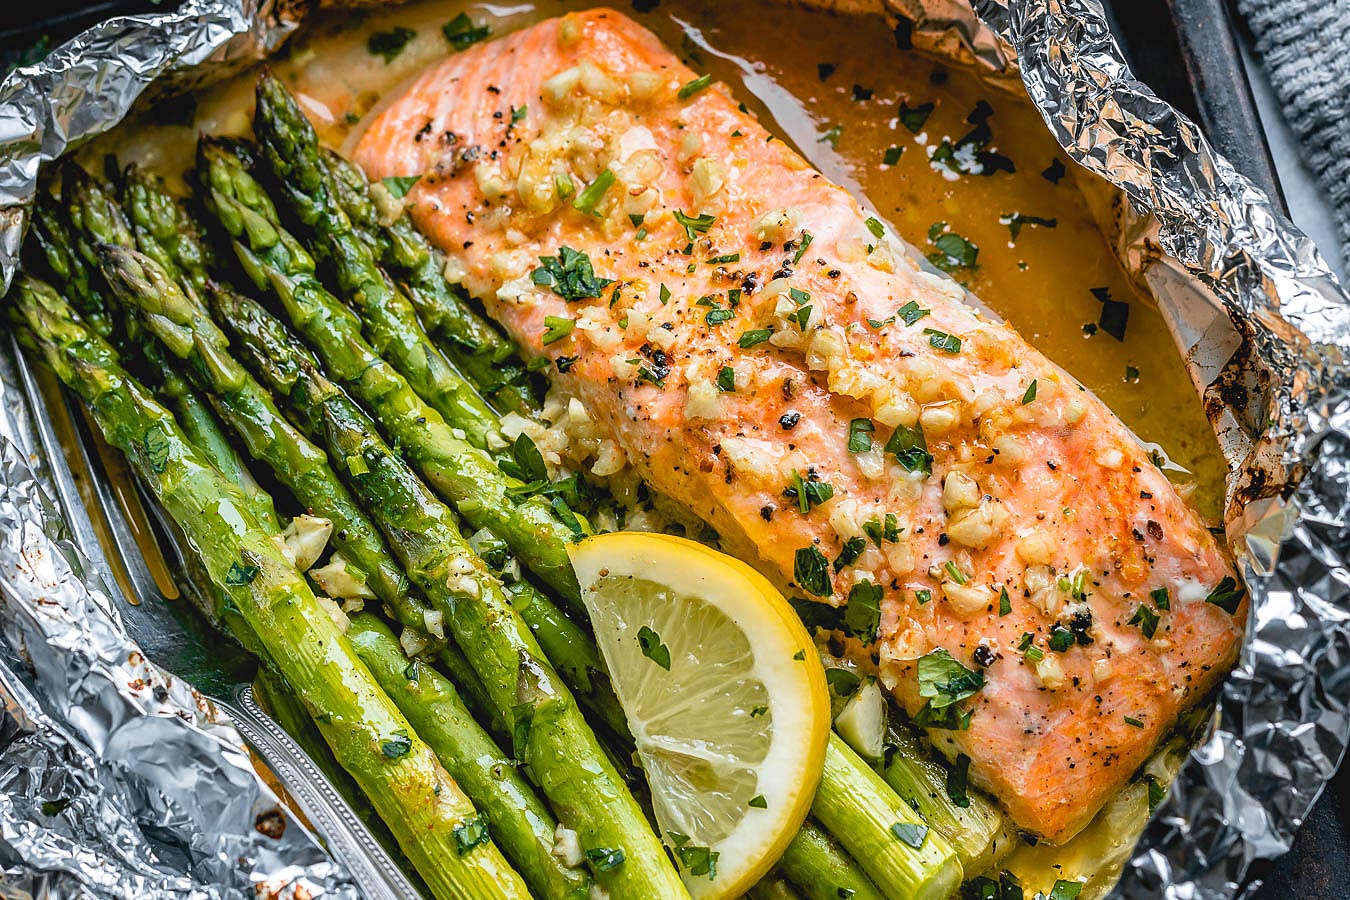 Baked Salmon In Foil Packs With Asparagus And Garlic Butter Sauce Best Salmon Recipe Eatwell101